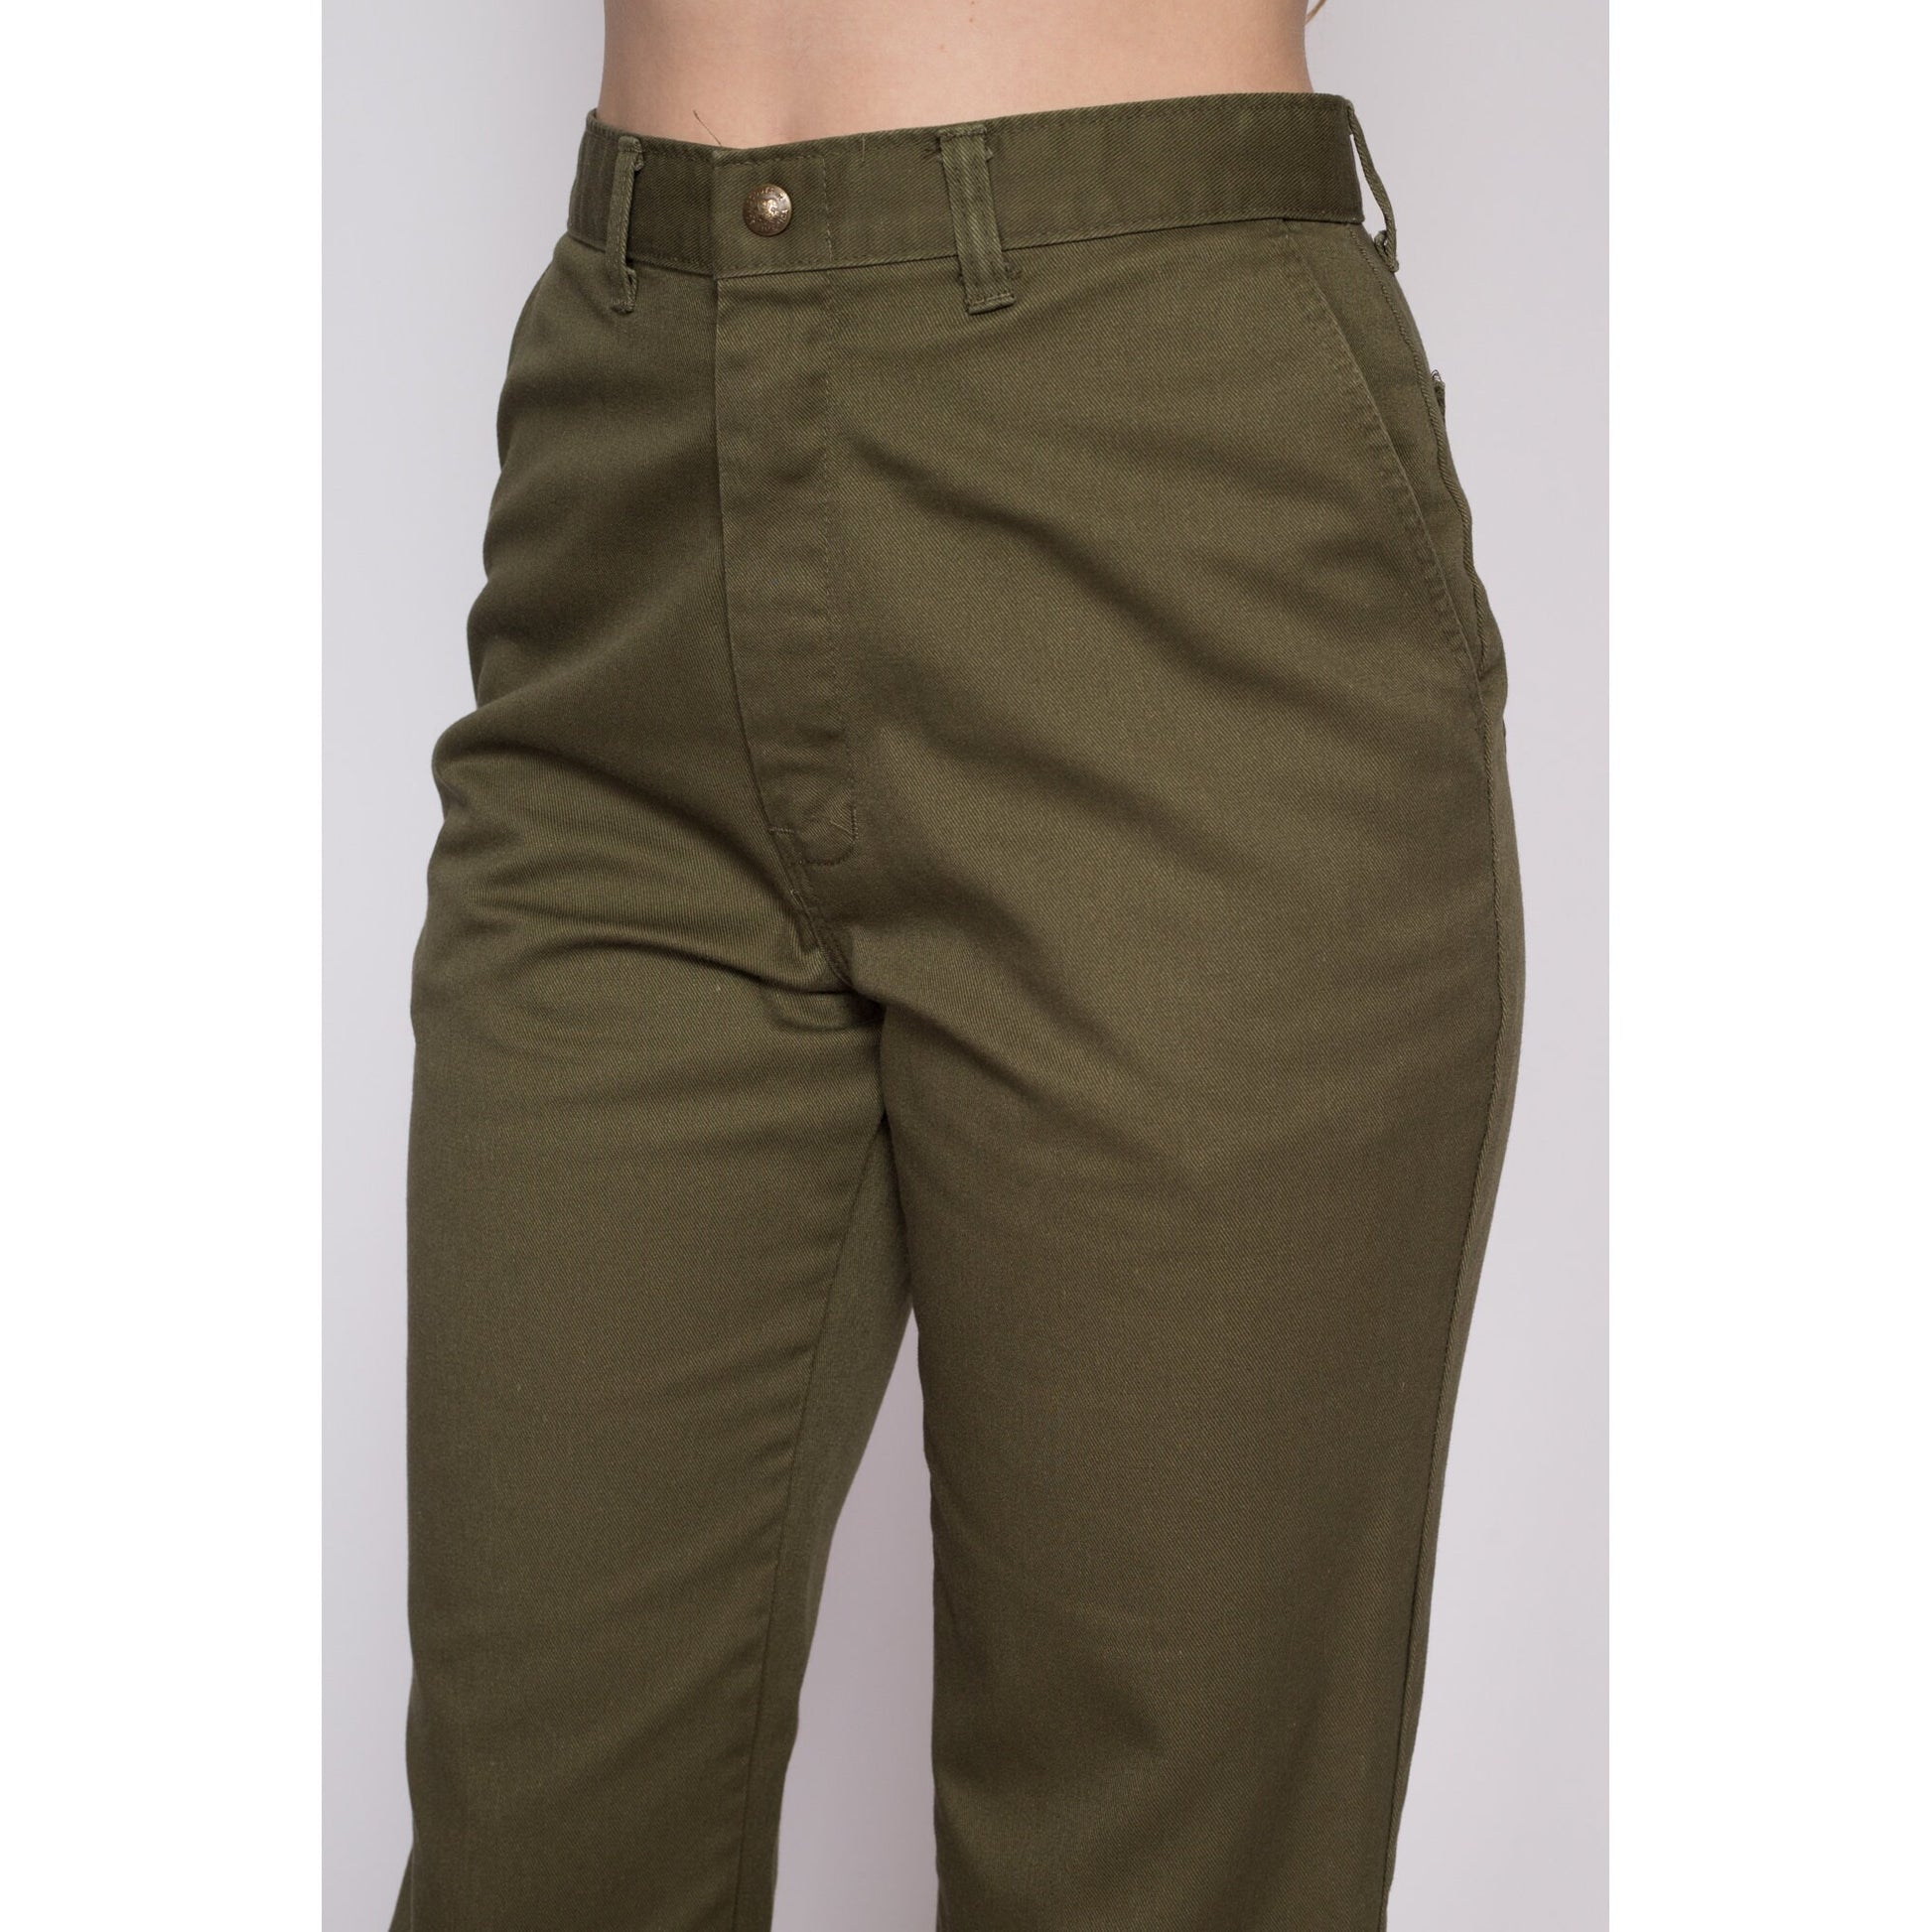 70s Boy Scout Uniform Pants - Men's Small, Women's Medium, 28.5" | Vintage Olive Green High Waisted Straight Leg Utility Trousers